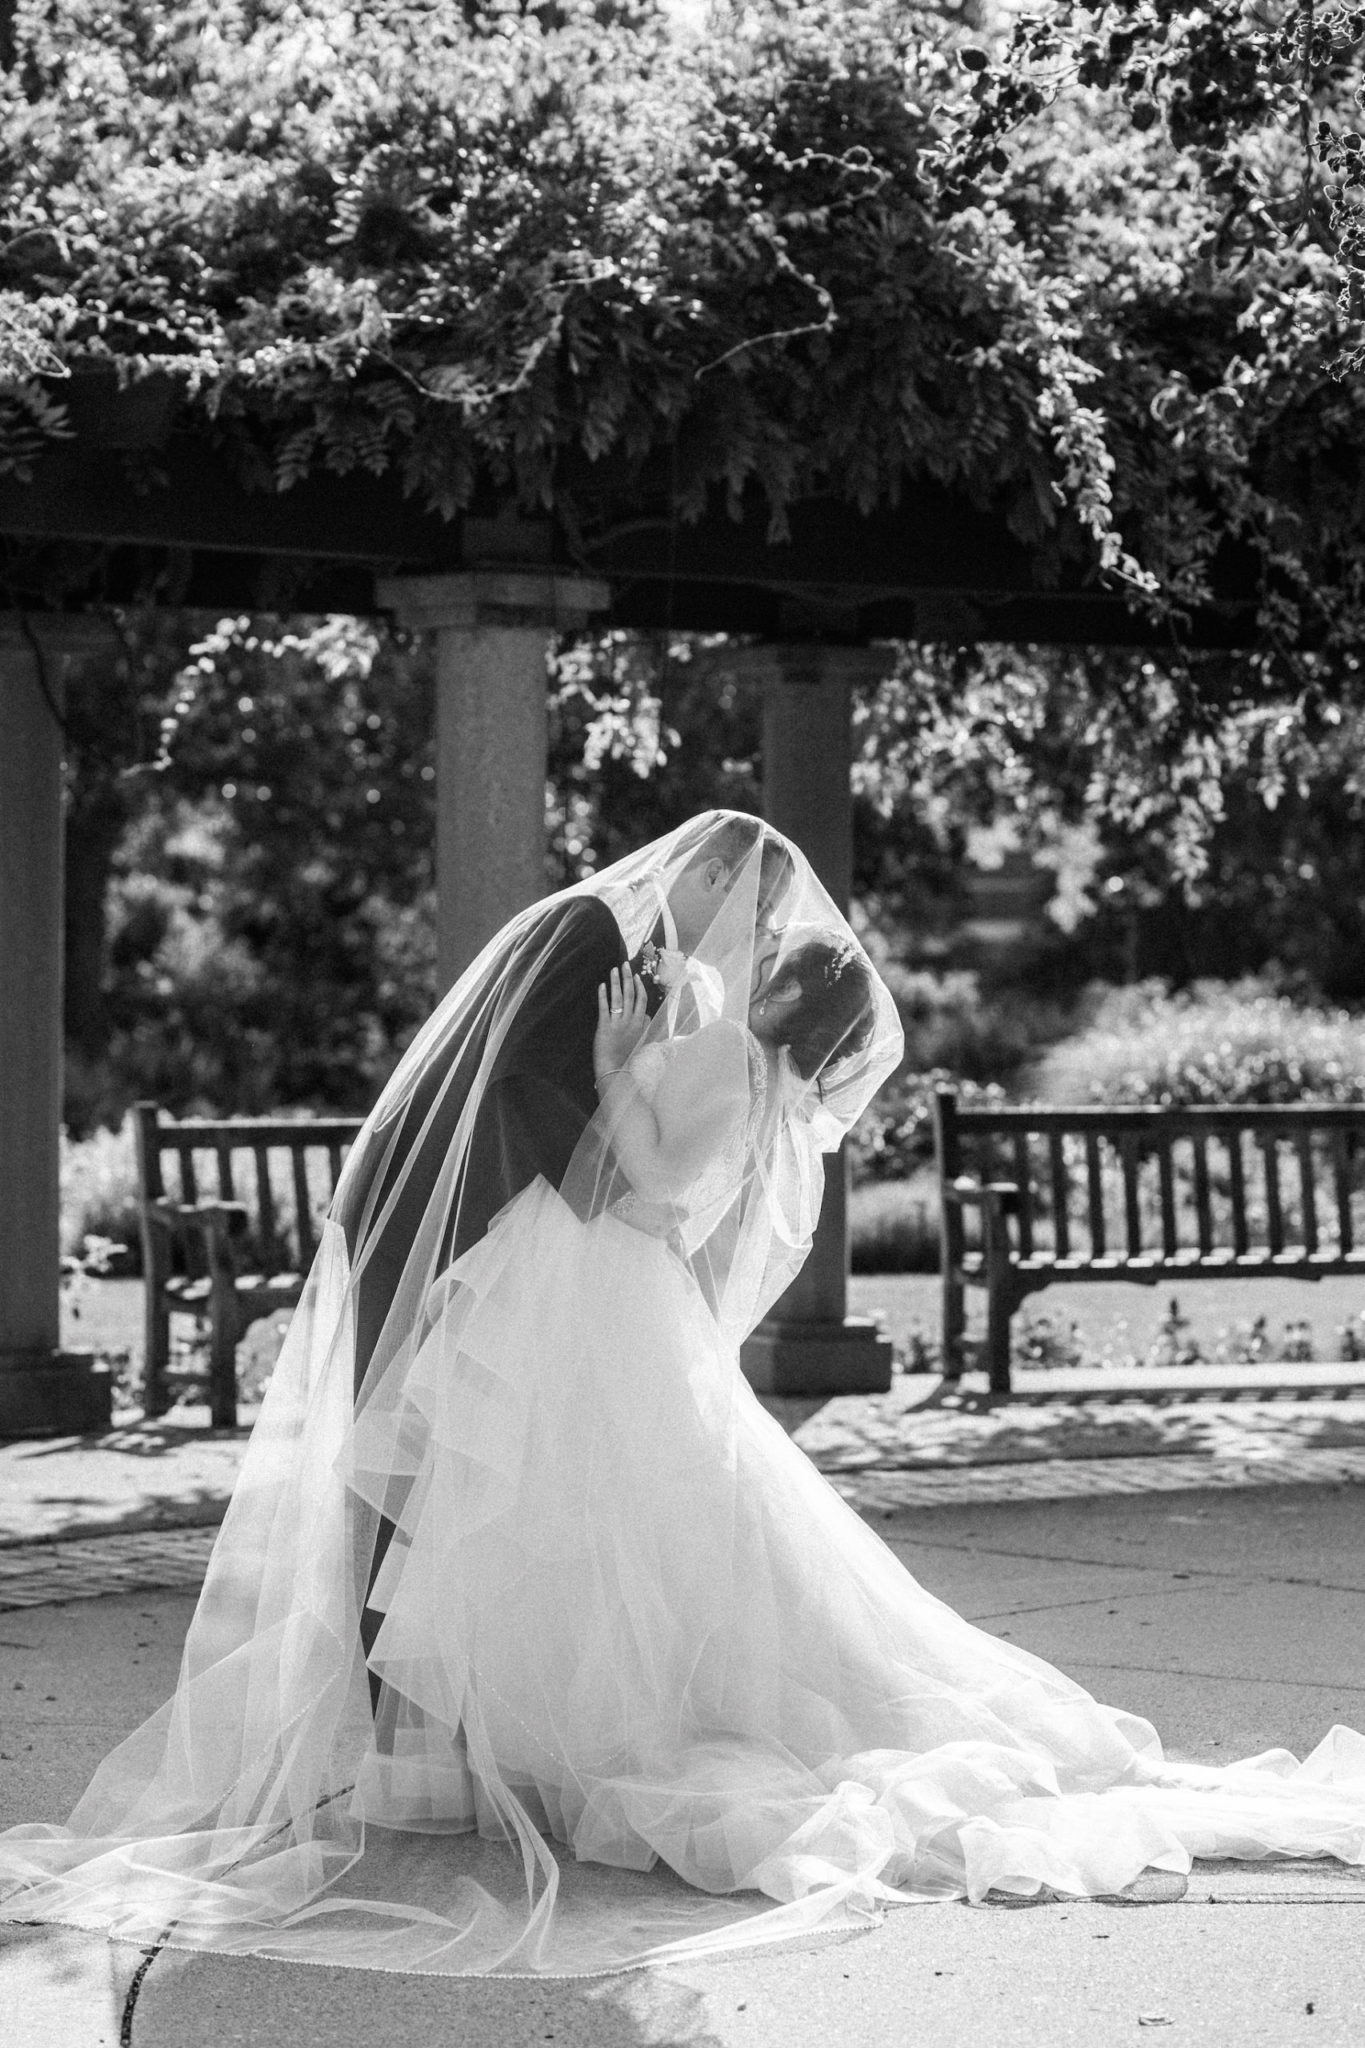 veil photo in black and white on msu campus